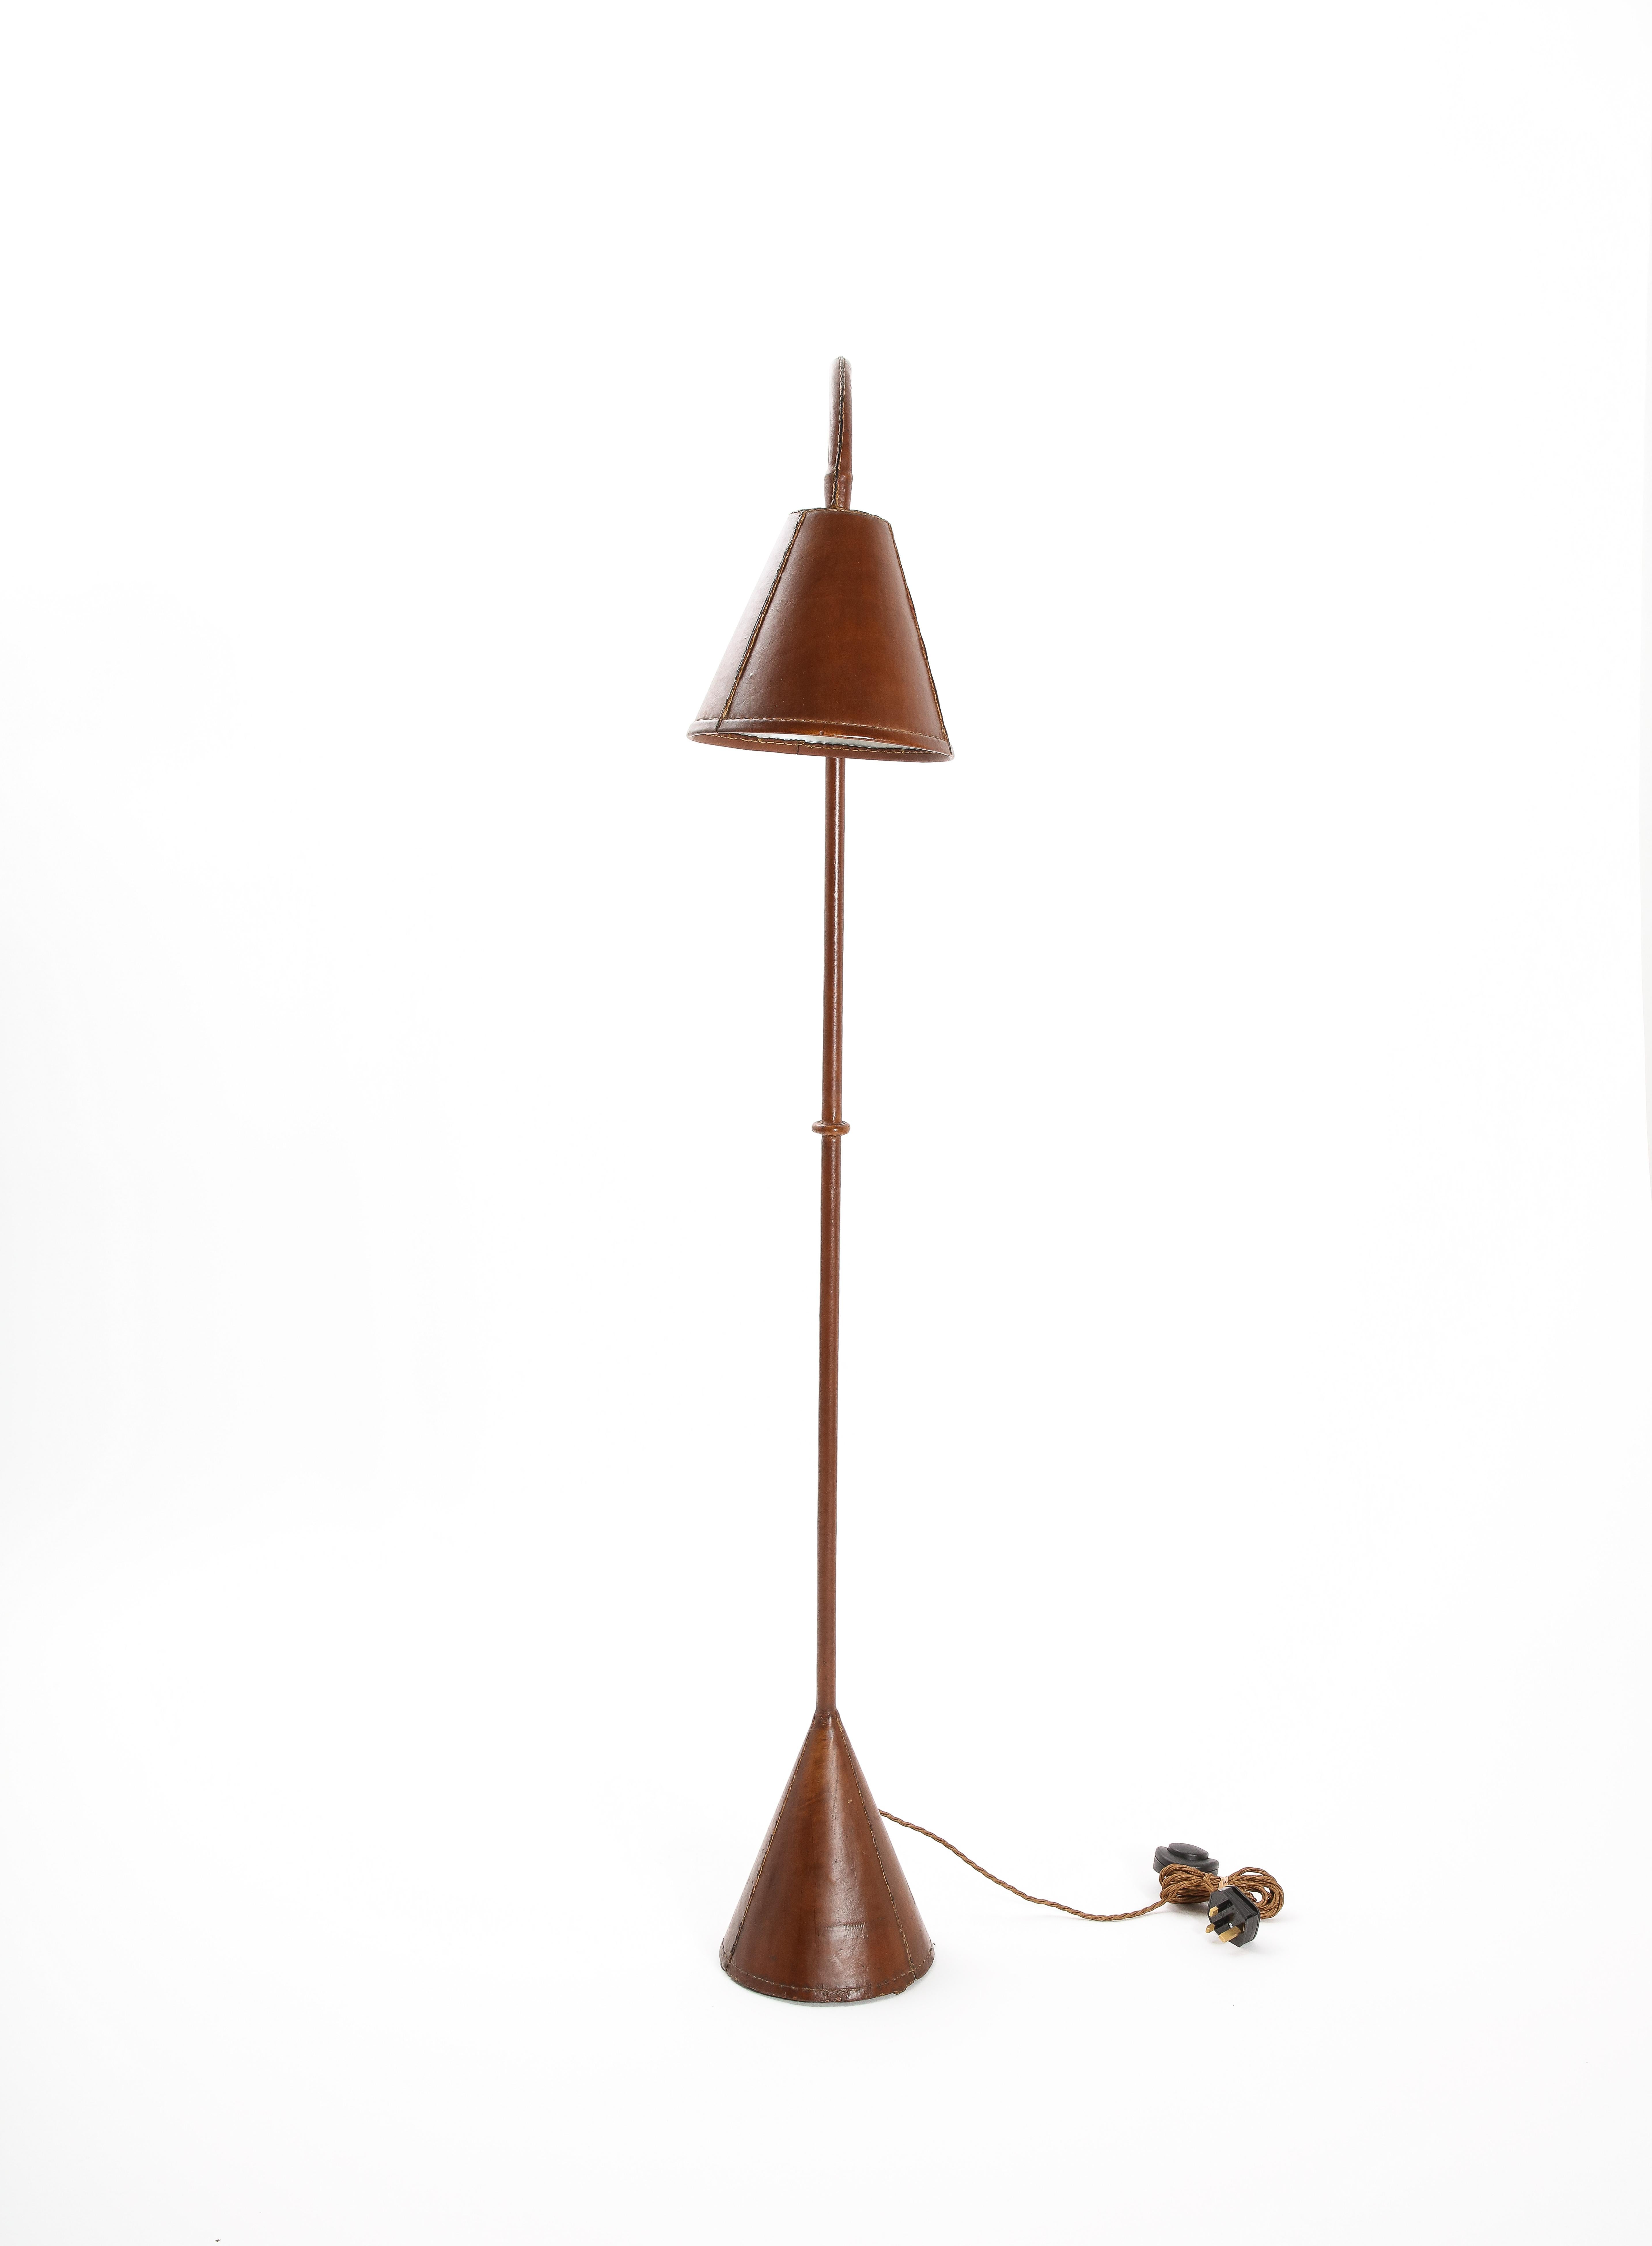 French Jacques Adnet Dual Cone Leather Floor Lamps. France 1950s